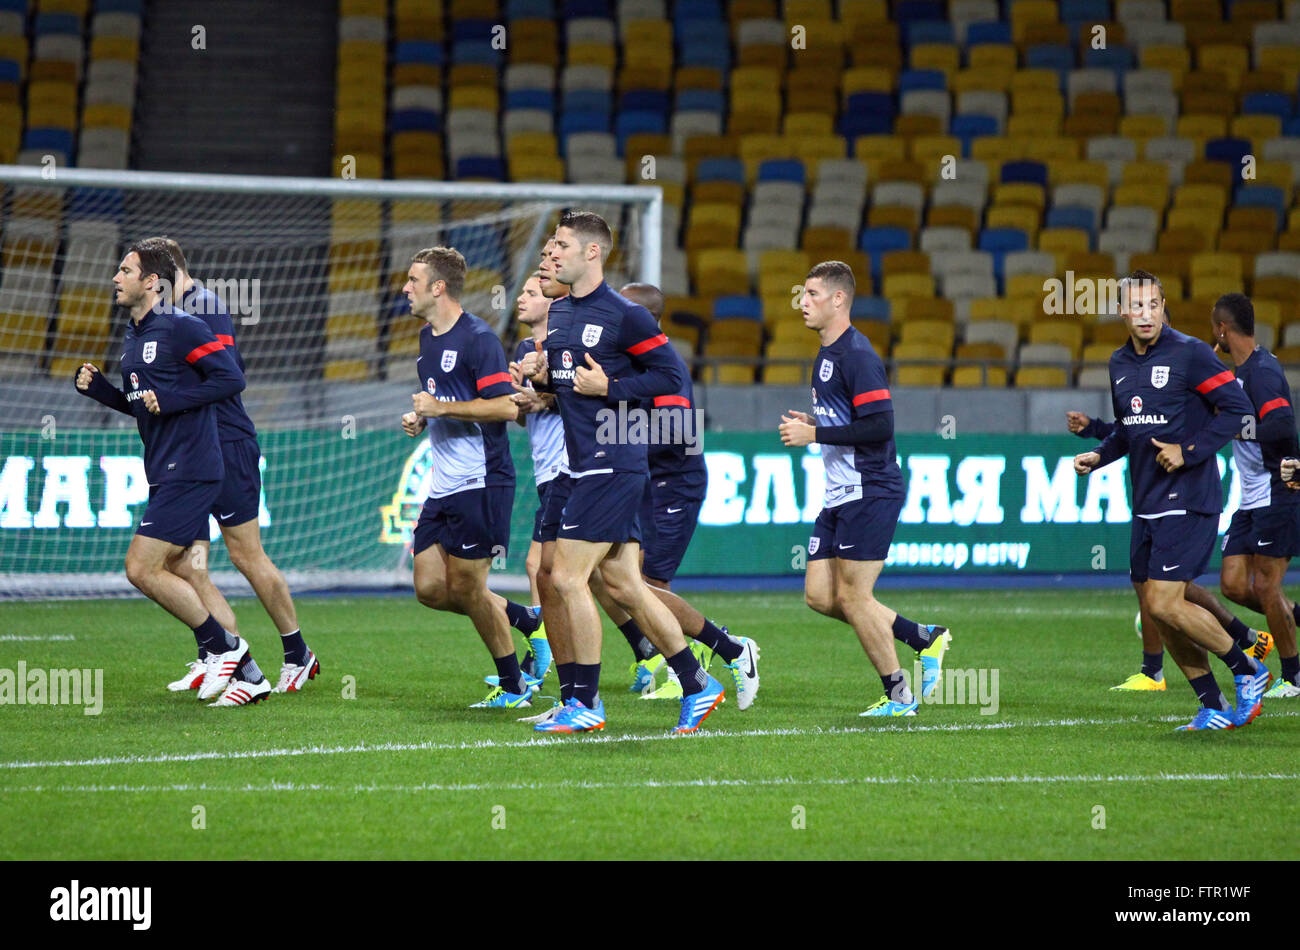 KYIV, UKRAINE - SEPTEMBER 9, 2013: England National football team players run during training session at NSC Olympic stadium before FIFA World Cup 2014 qualifier game against Ukraine Stock Photo